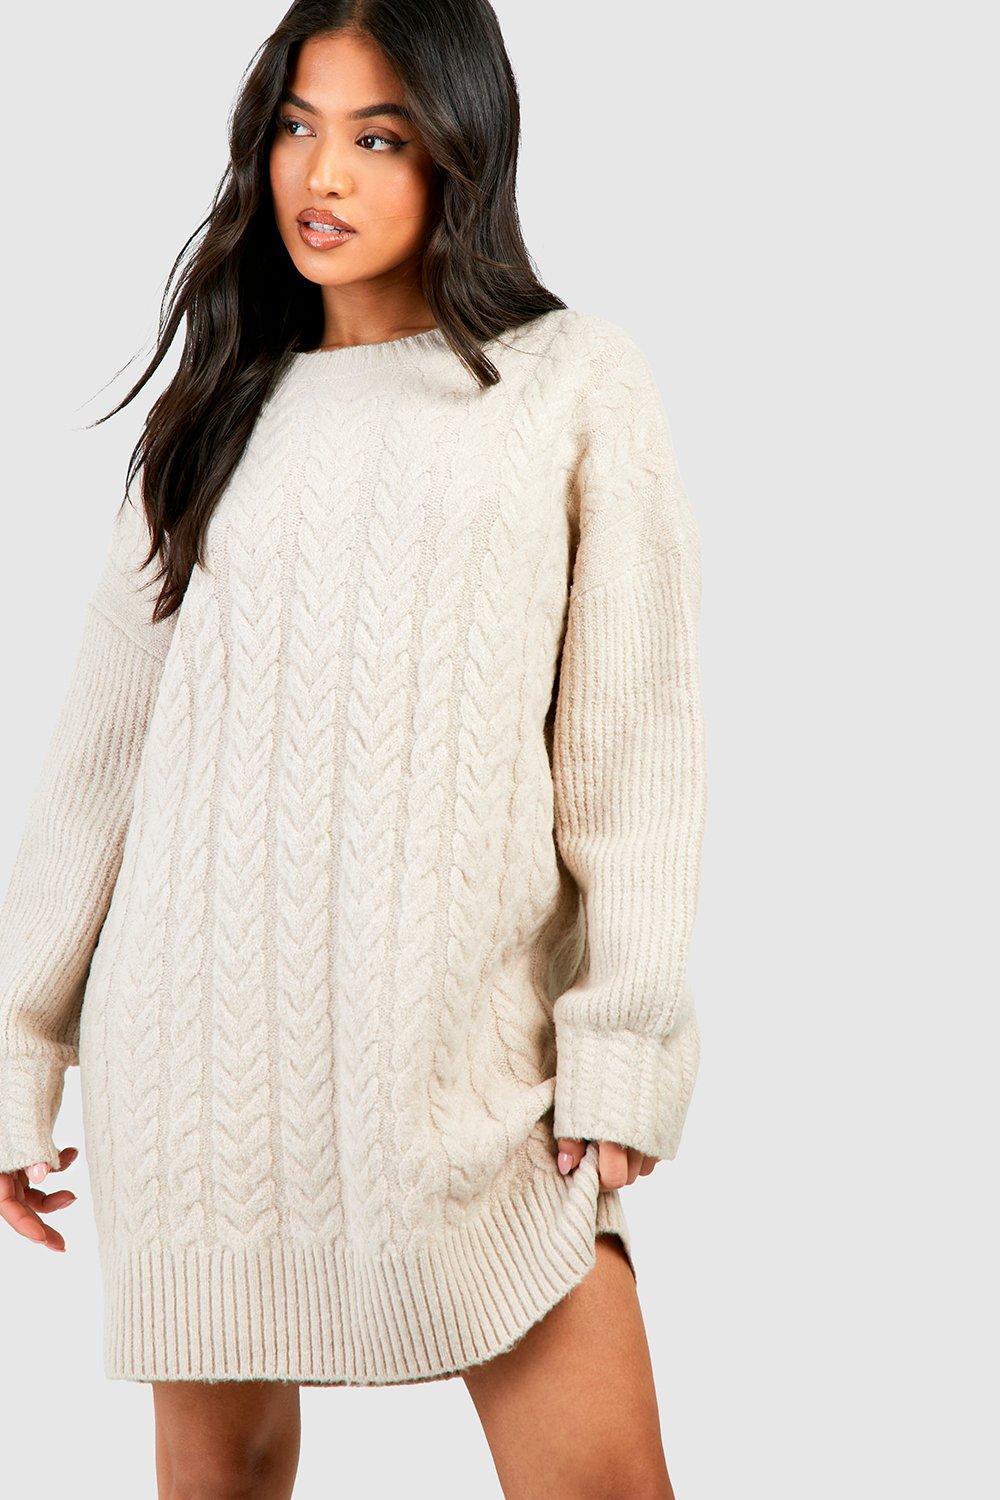 Petite Cream Cable Knit Sweater Dress